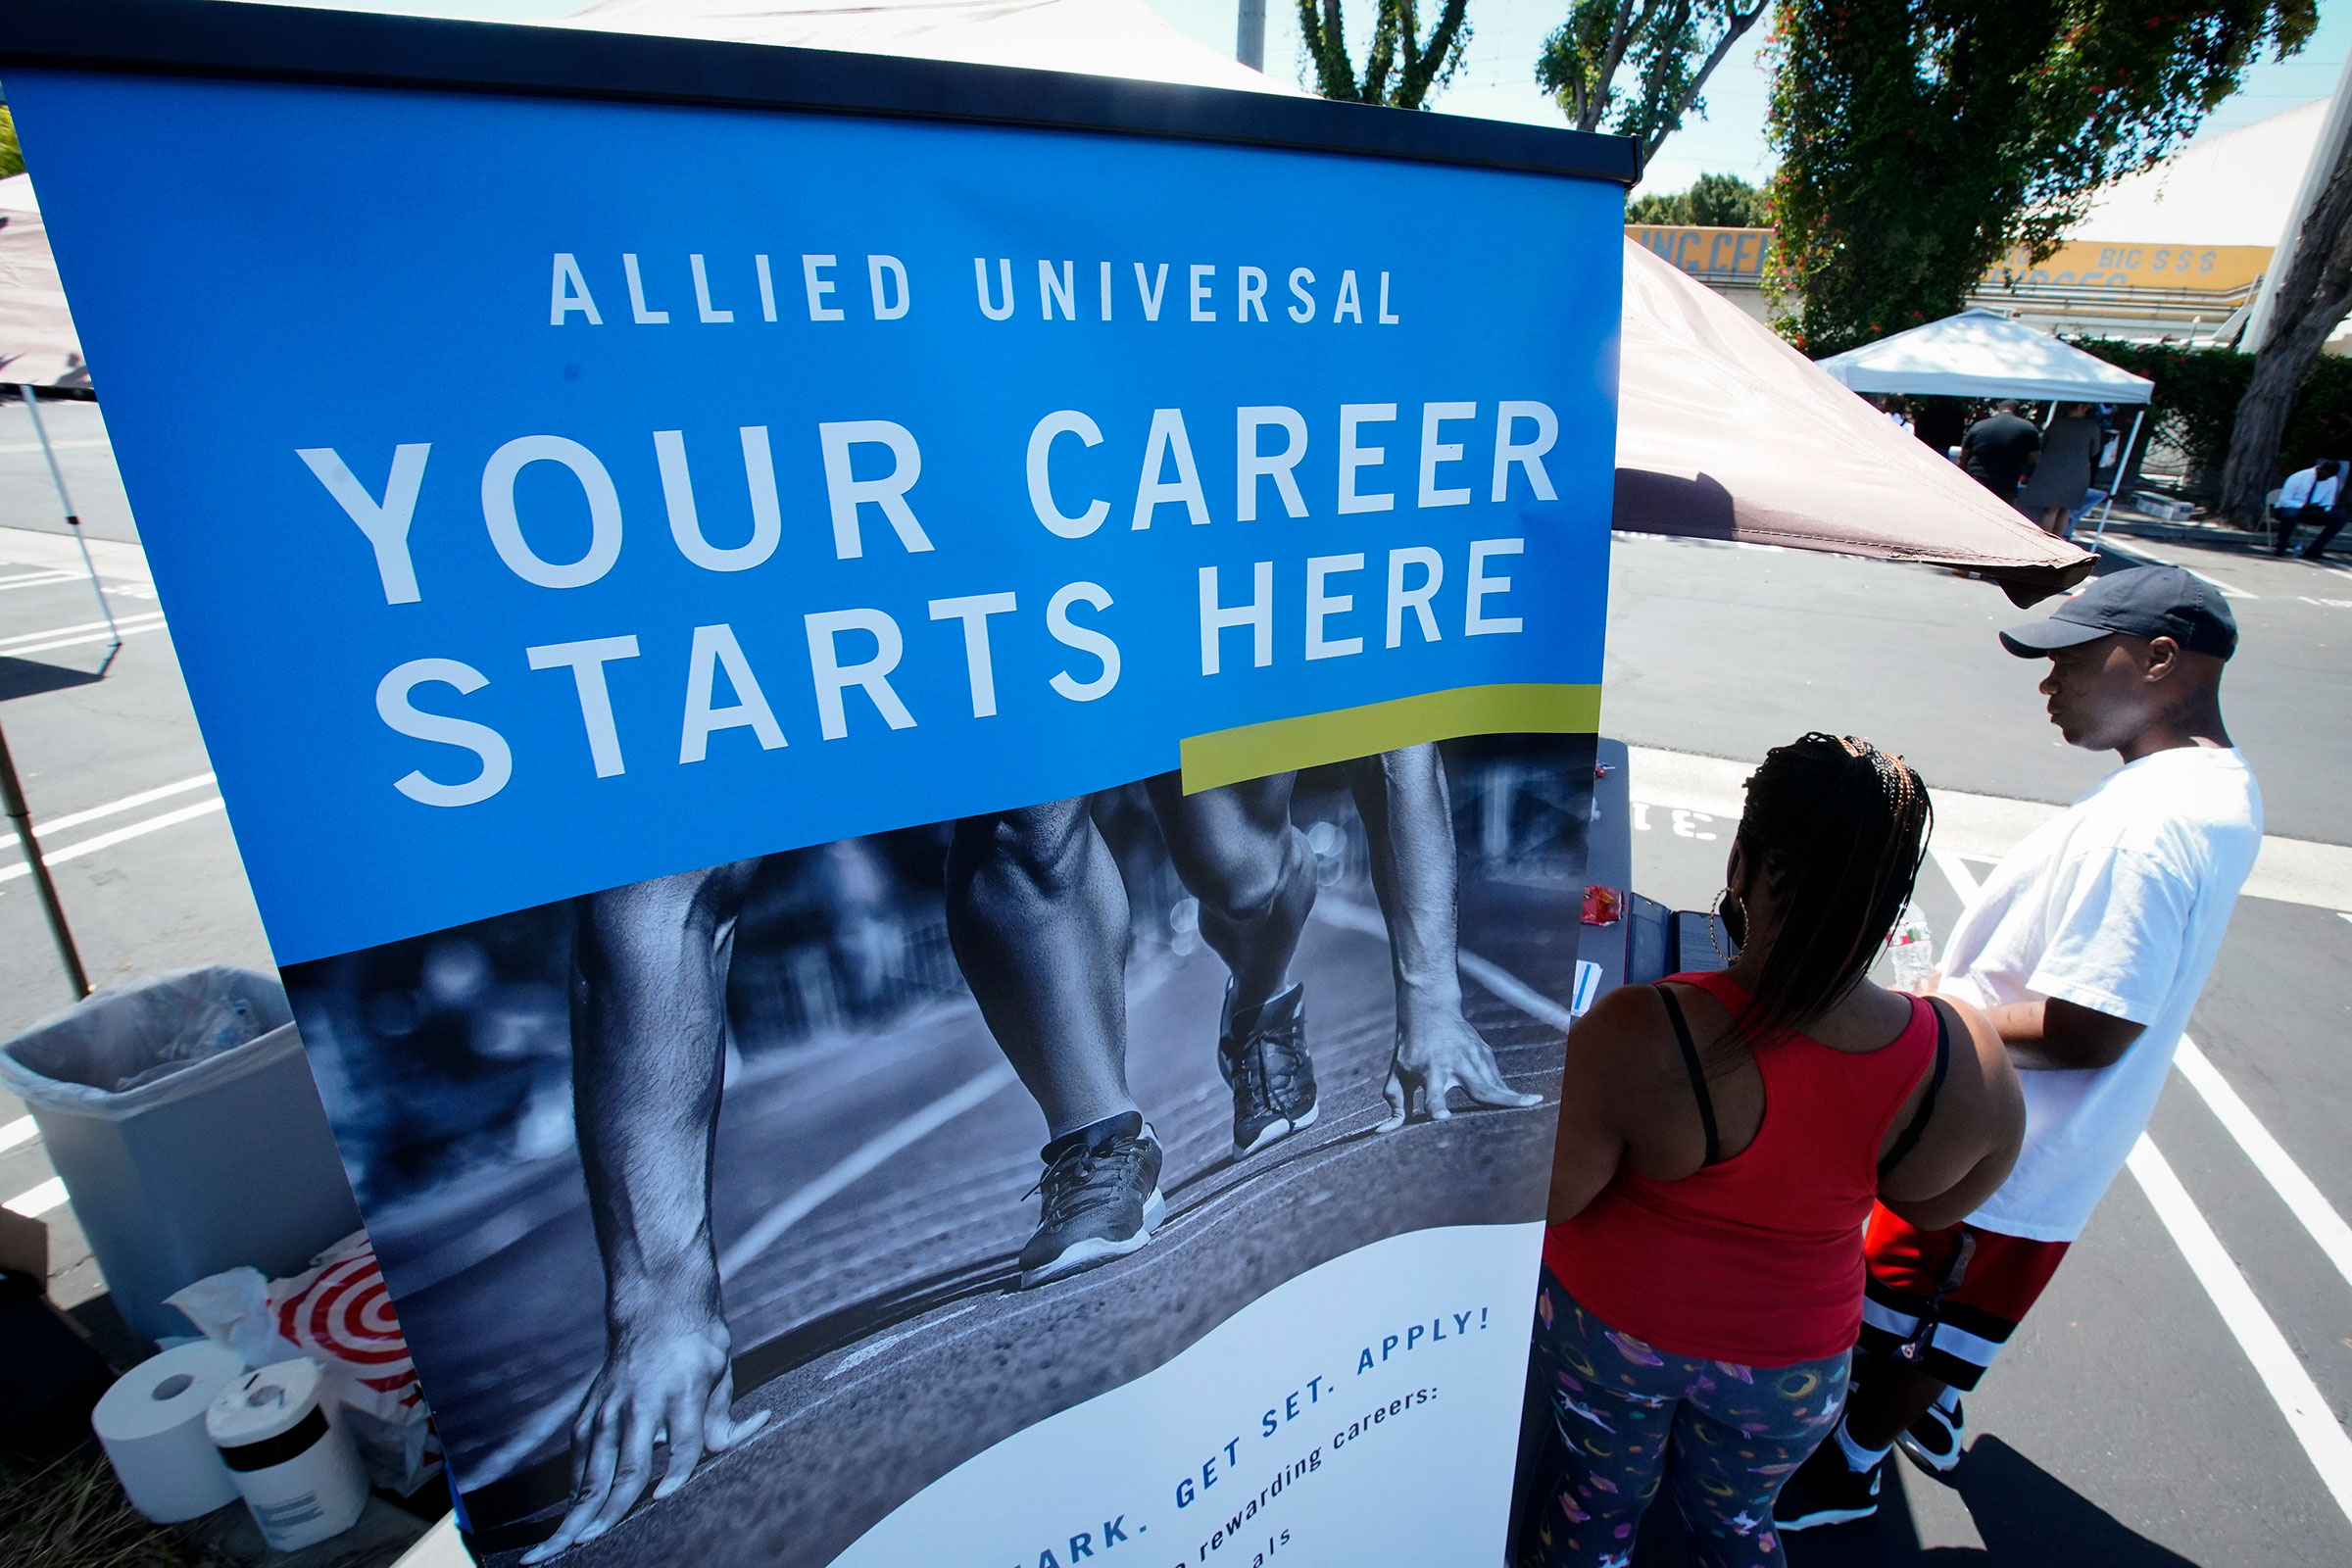 Job seekers fill out an application at a drive up job fair for Allied Universal in in Gardena, Calif. on May 6, 2020.